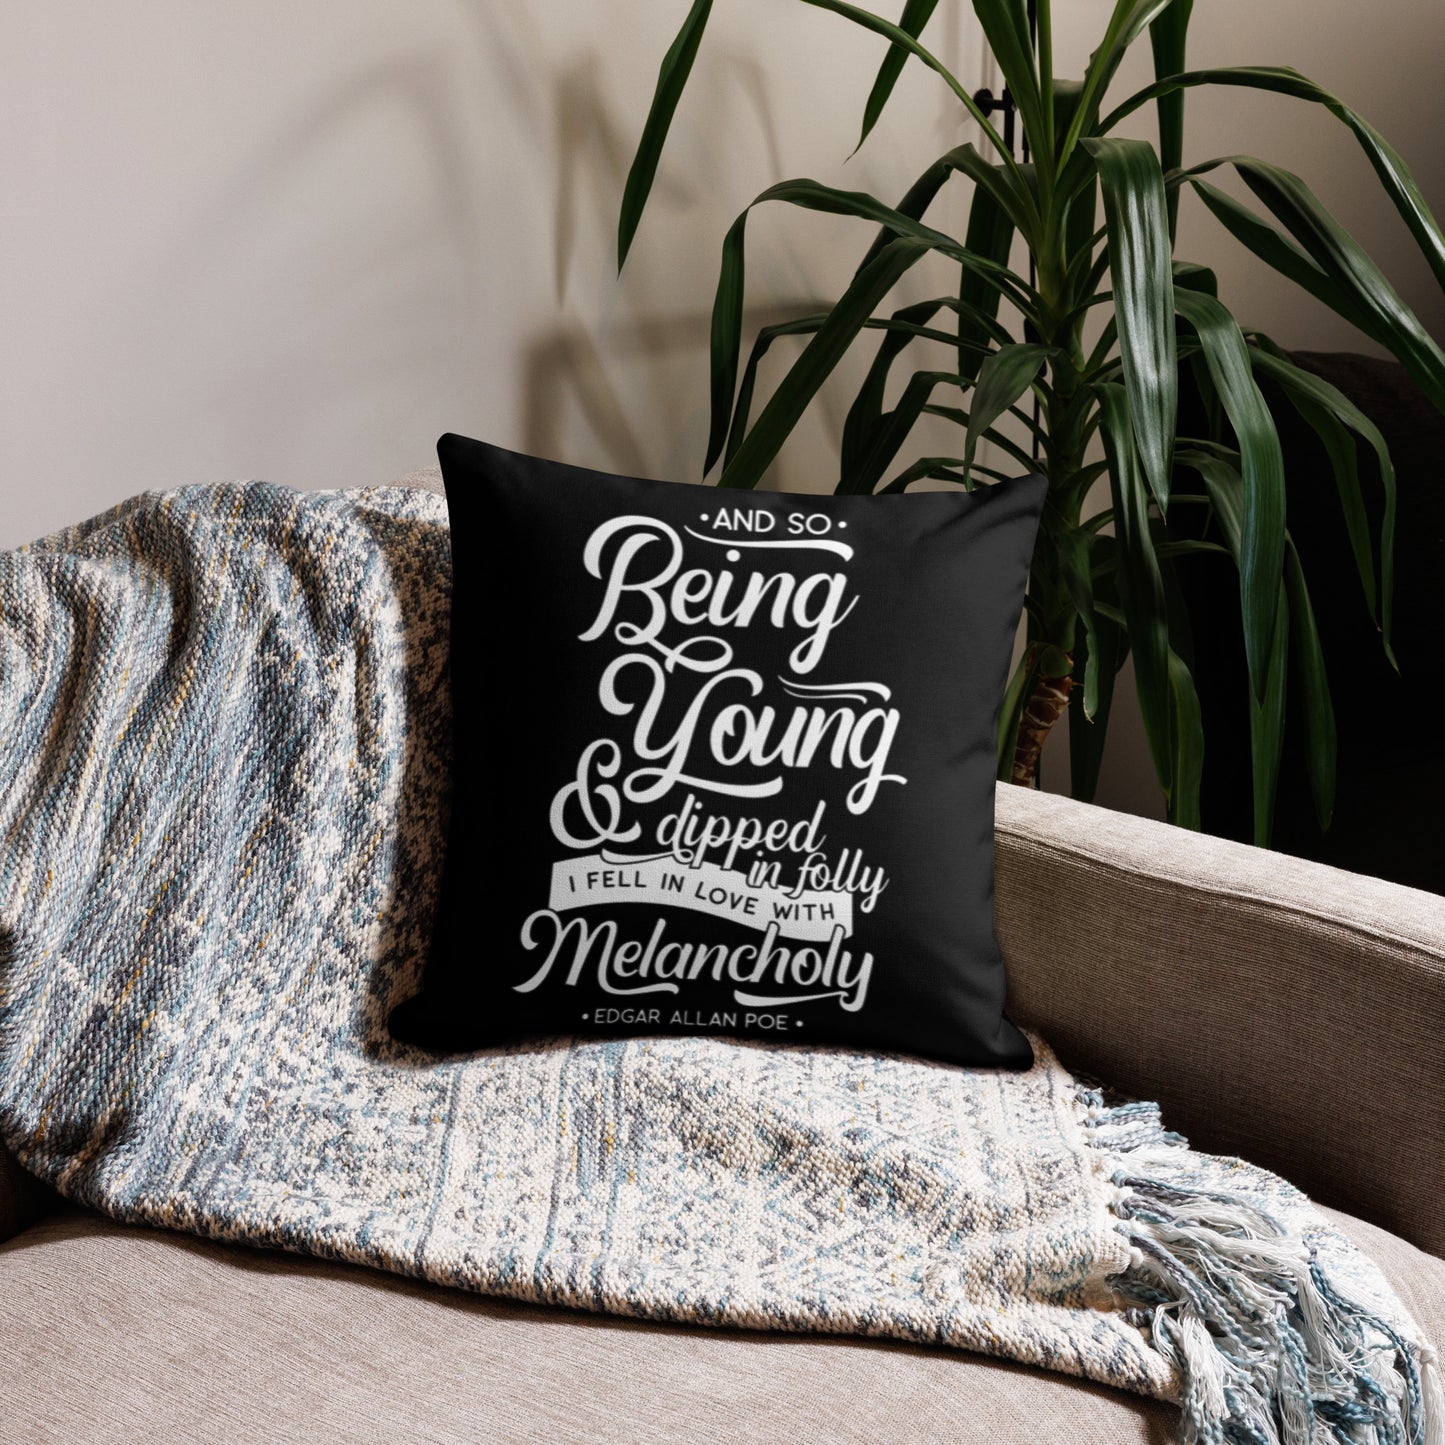 Fell in Love with Melancholy Edgar Allan Poe Quote Premium Black Pillow - 18 x 18